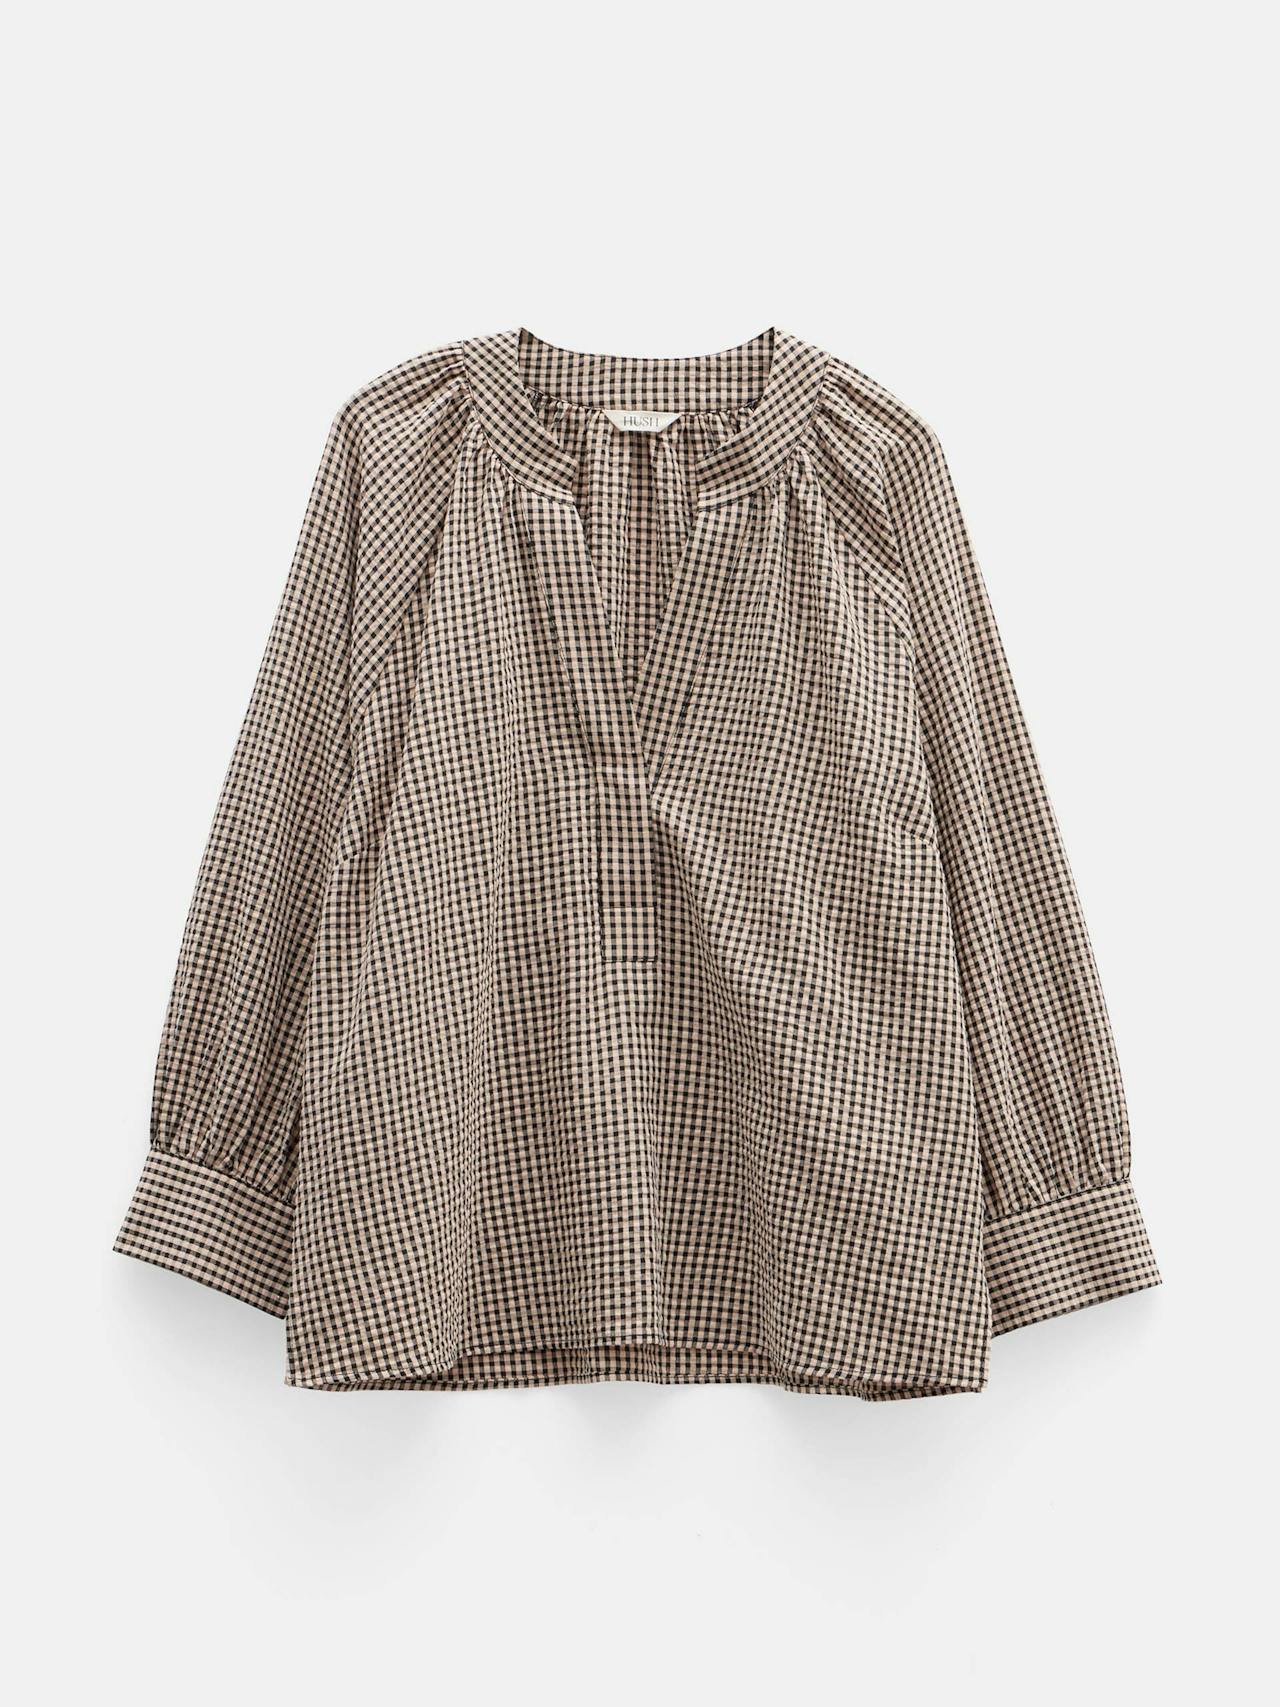 Rhea relaxed cotton placket detail top